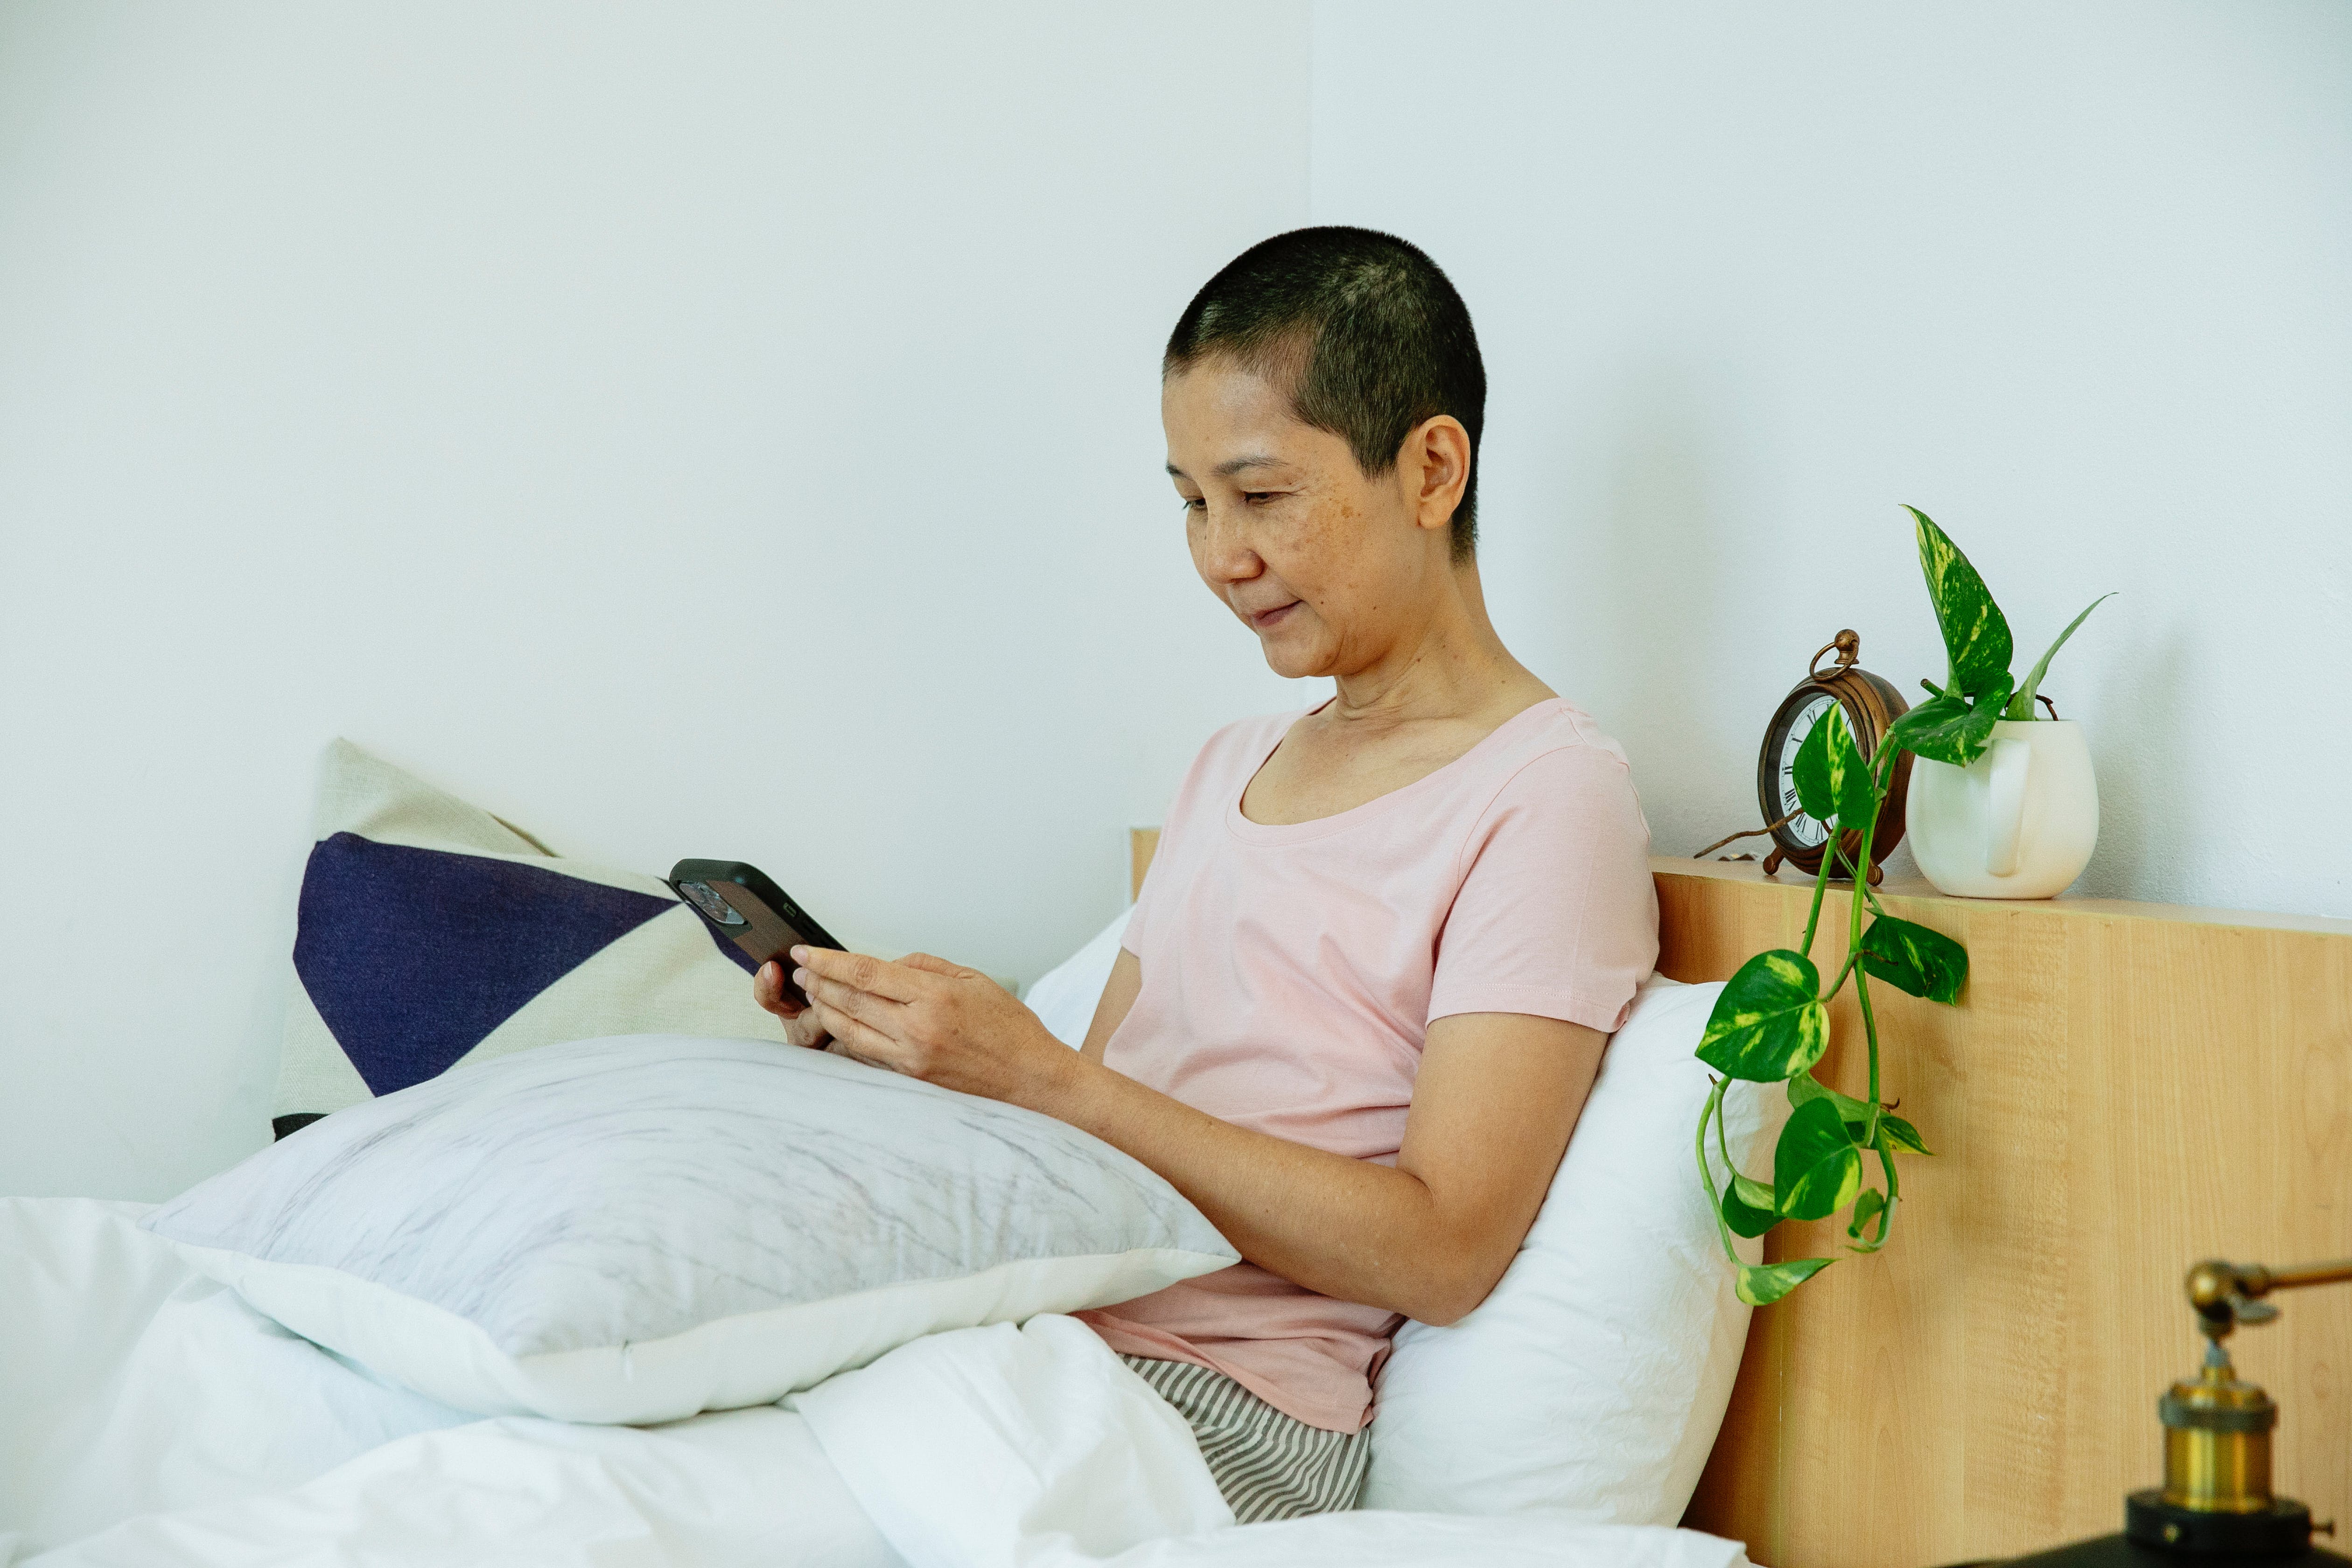 A woman using a smartphone while on the bed┃Source: Pexels